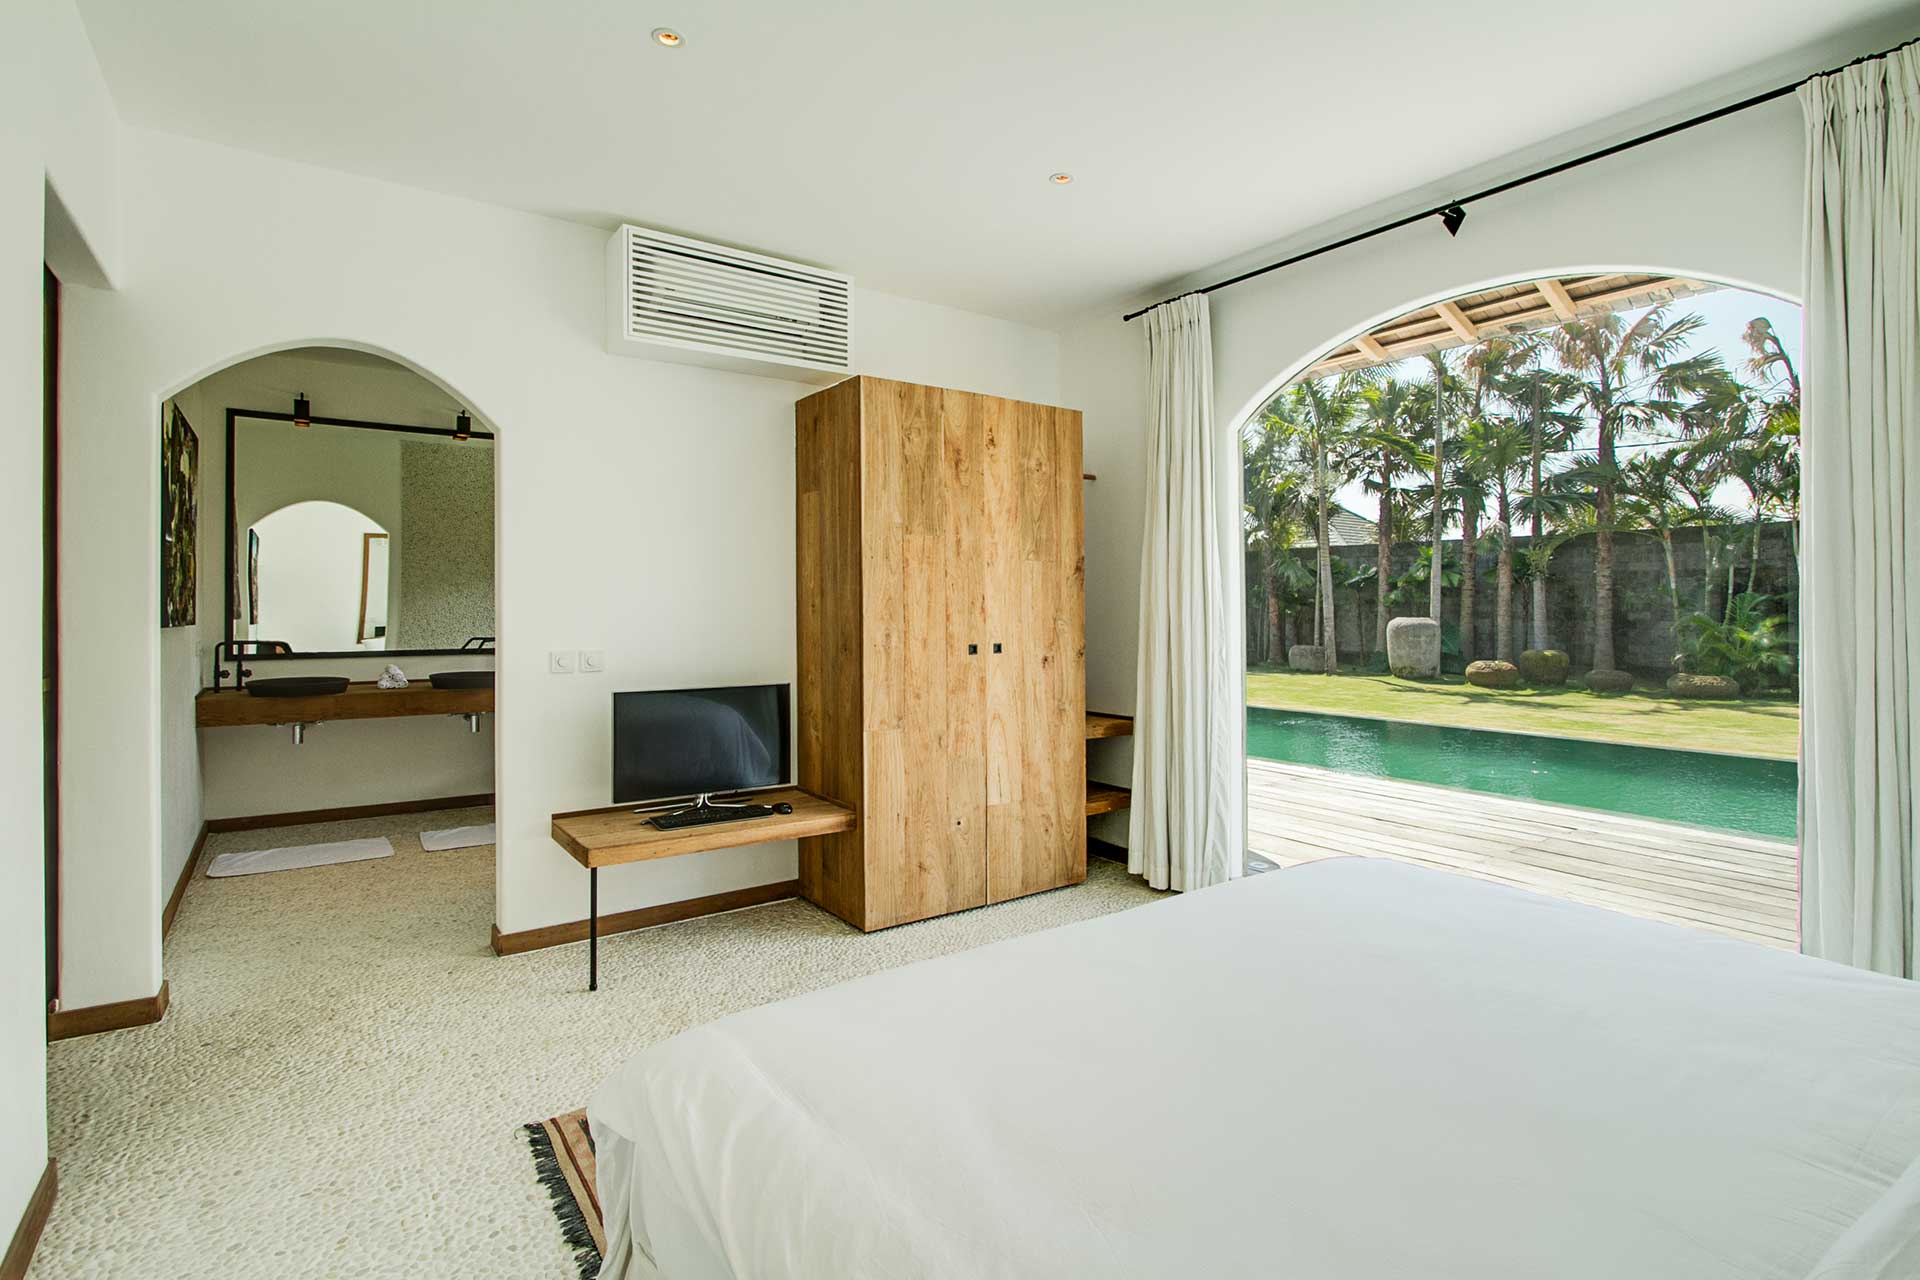 Main Villa Pool View Room, plenty of closet space and a private bathroom